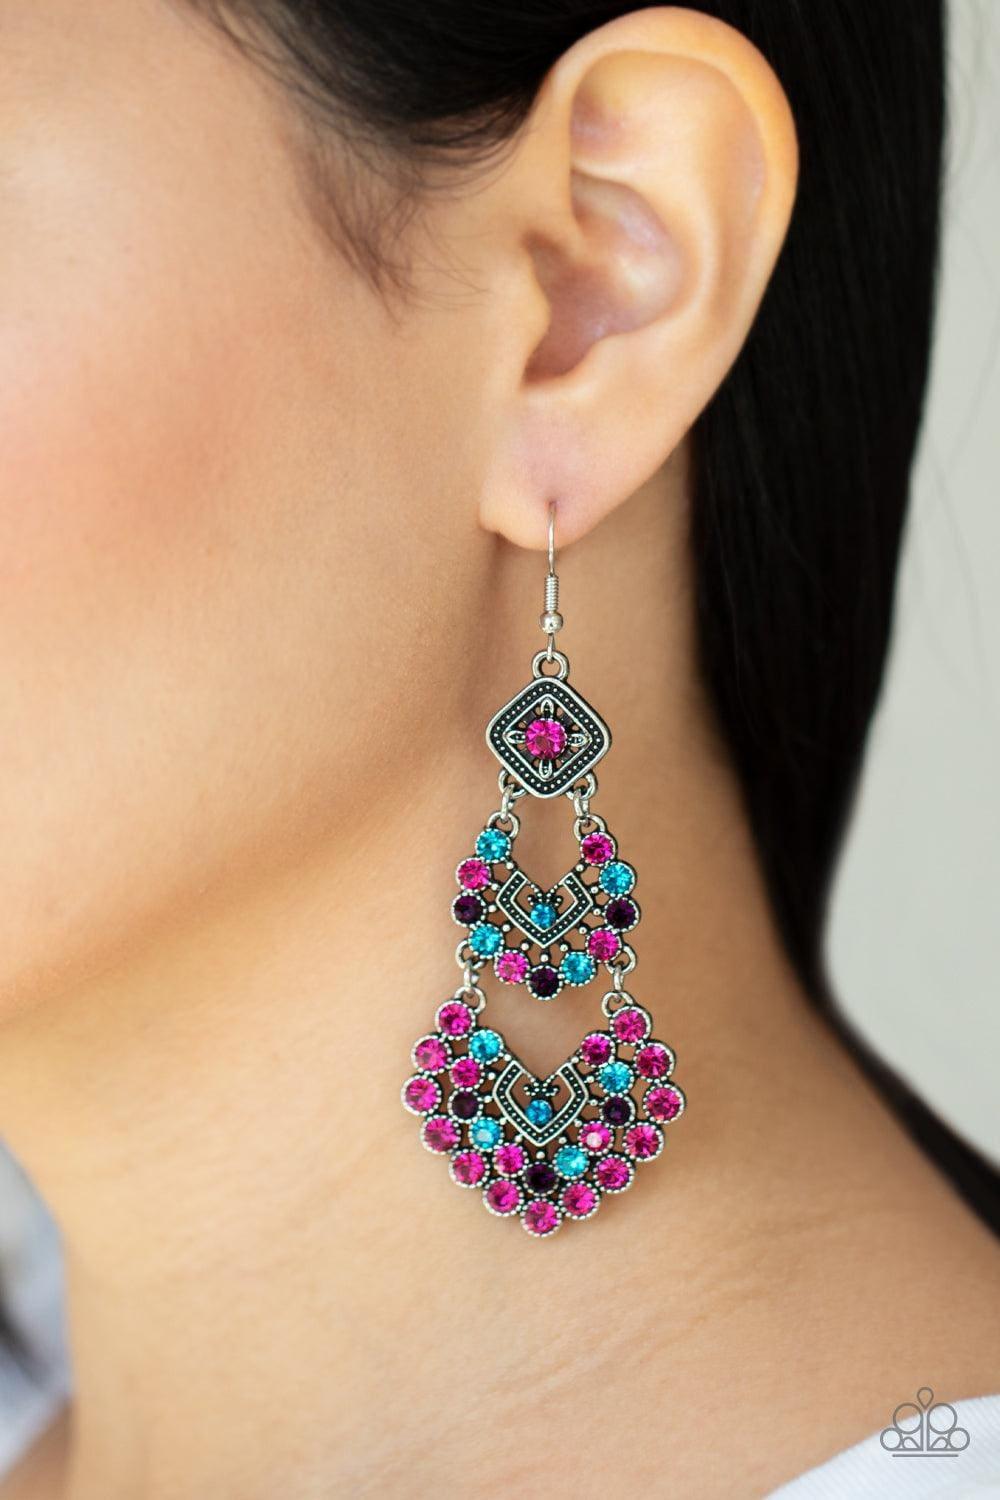 Paparazzi Accessories - All For The Glam - Multicolor Earrings - Bling by JessieK